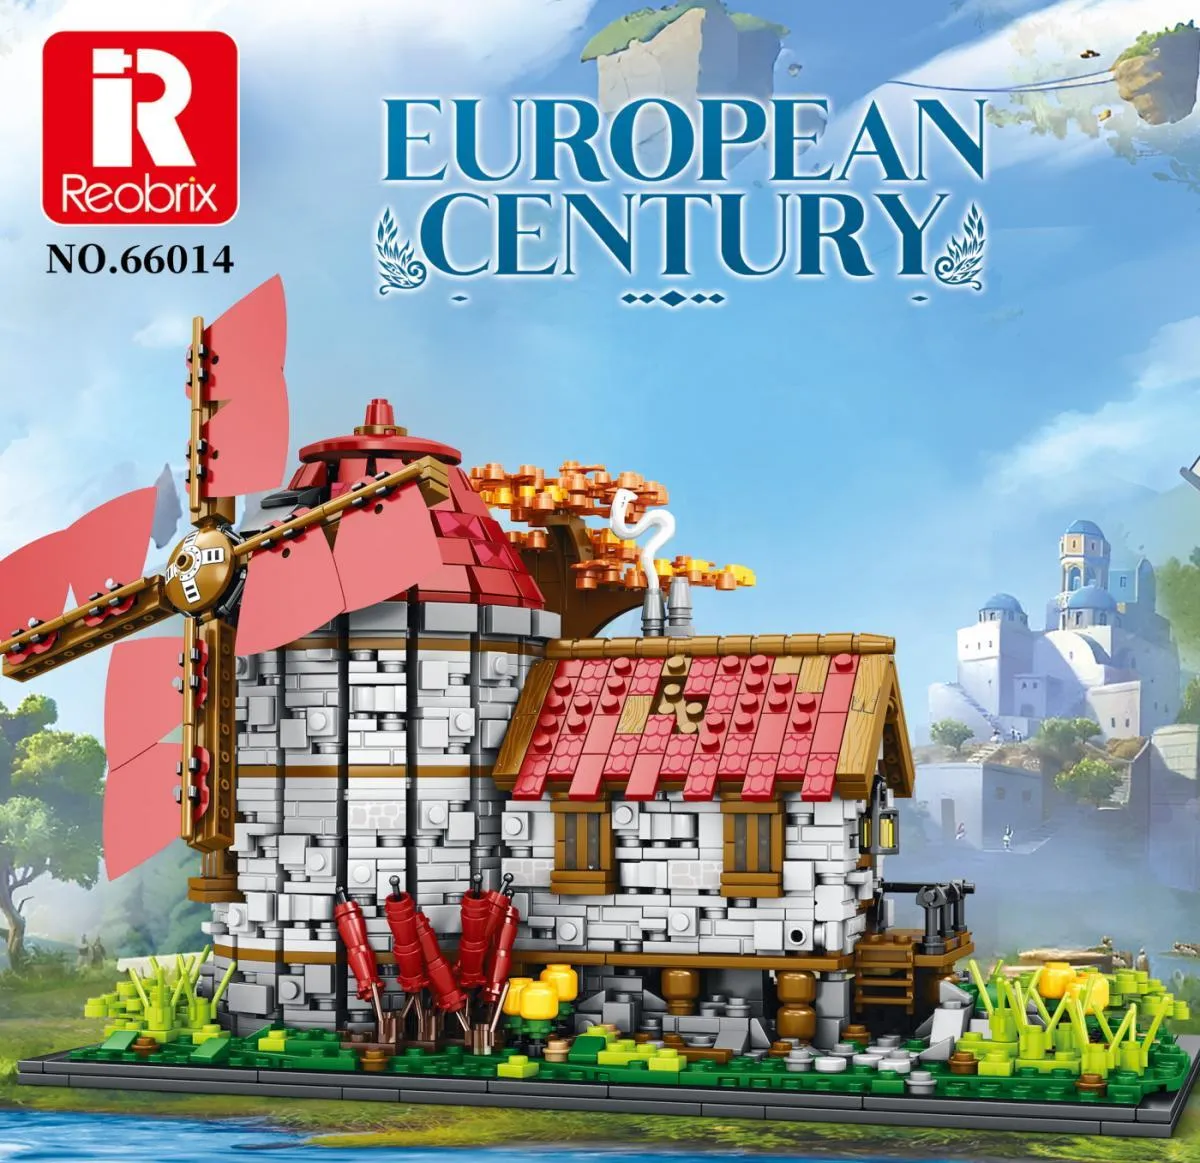 Medieval Town - Windmill Gallery